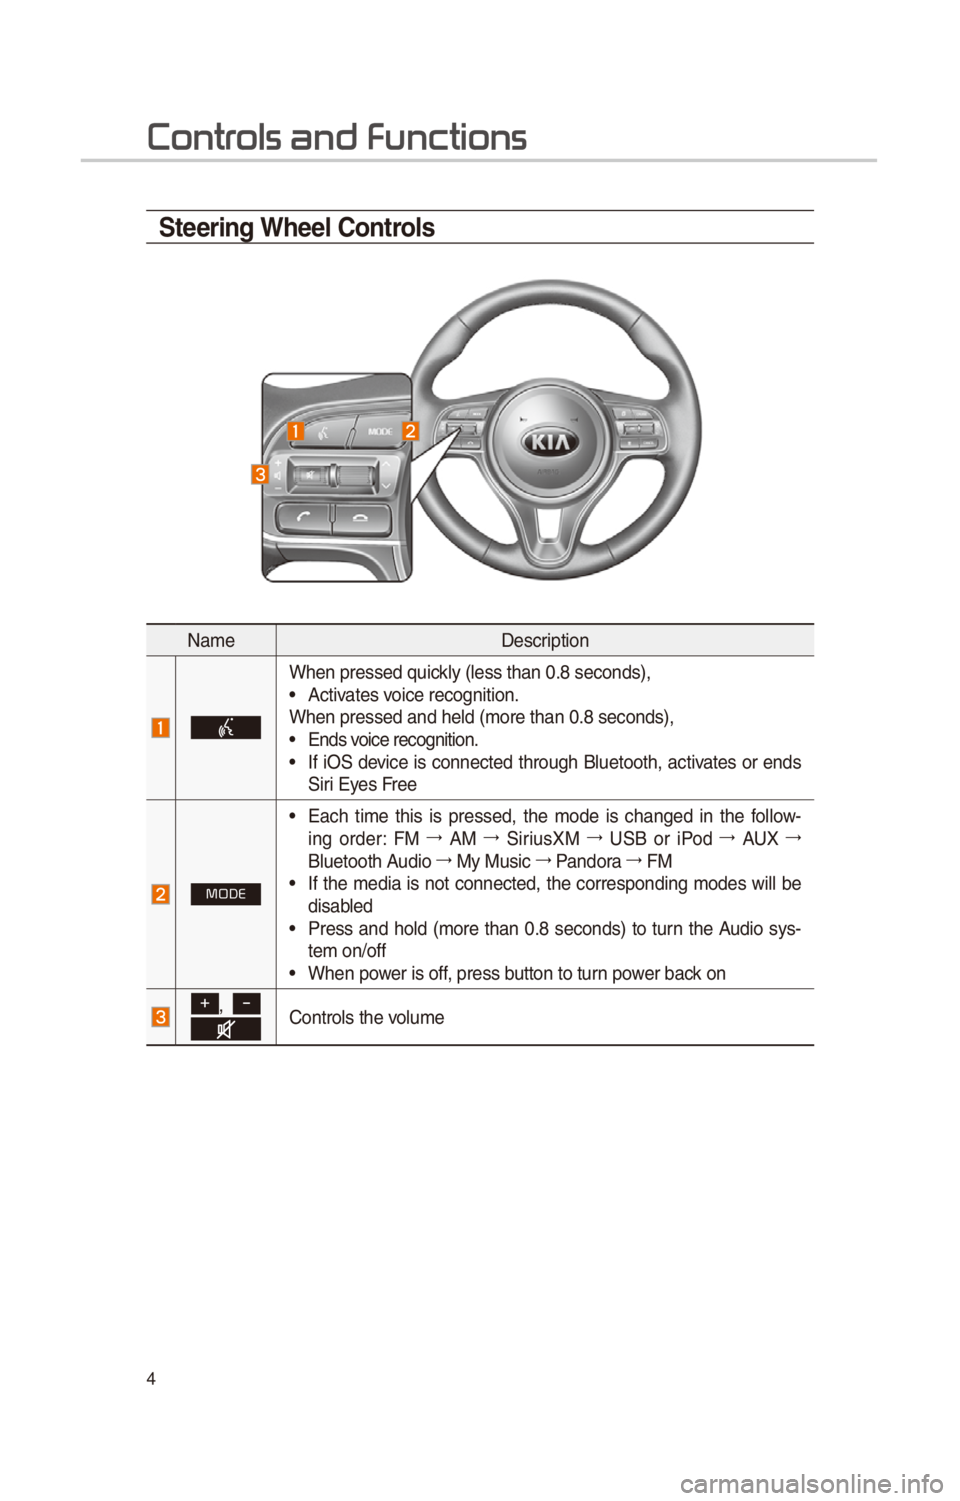 KIA OPTIMA HYBRID 2017  Quick Reference Guide 4
Steering Wheel Controls
NameDescr\fpt\fon
When pressed qu\fckly (less than 0.8 \cseconds),• Act\fvates vo\fce recogn\ft\fon.
When pressed and h\celd (more than 0.8\c seconds),
• Ends vo\fce reco